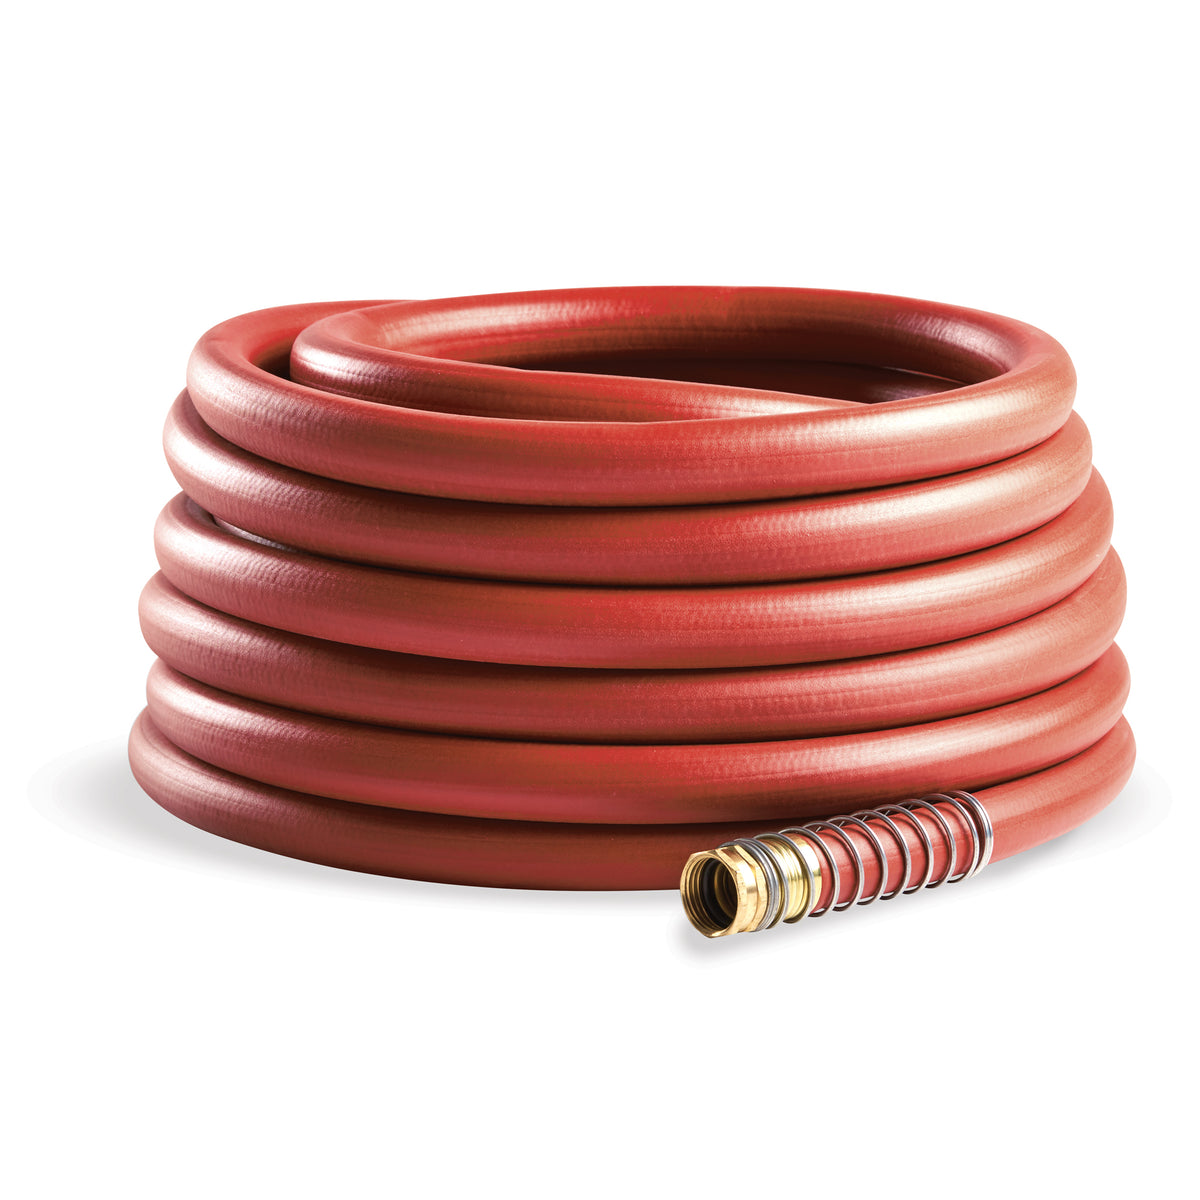 Gilmour 840751-1002  Professional Commercial Hose, 3/4 Inch x 75 Feet